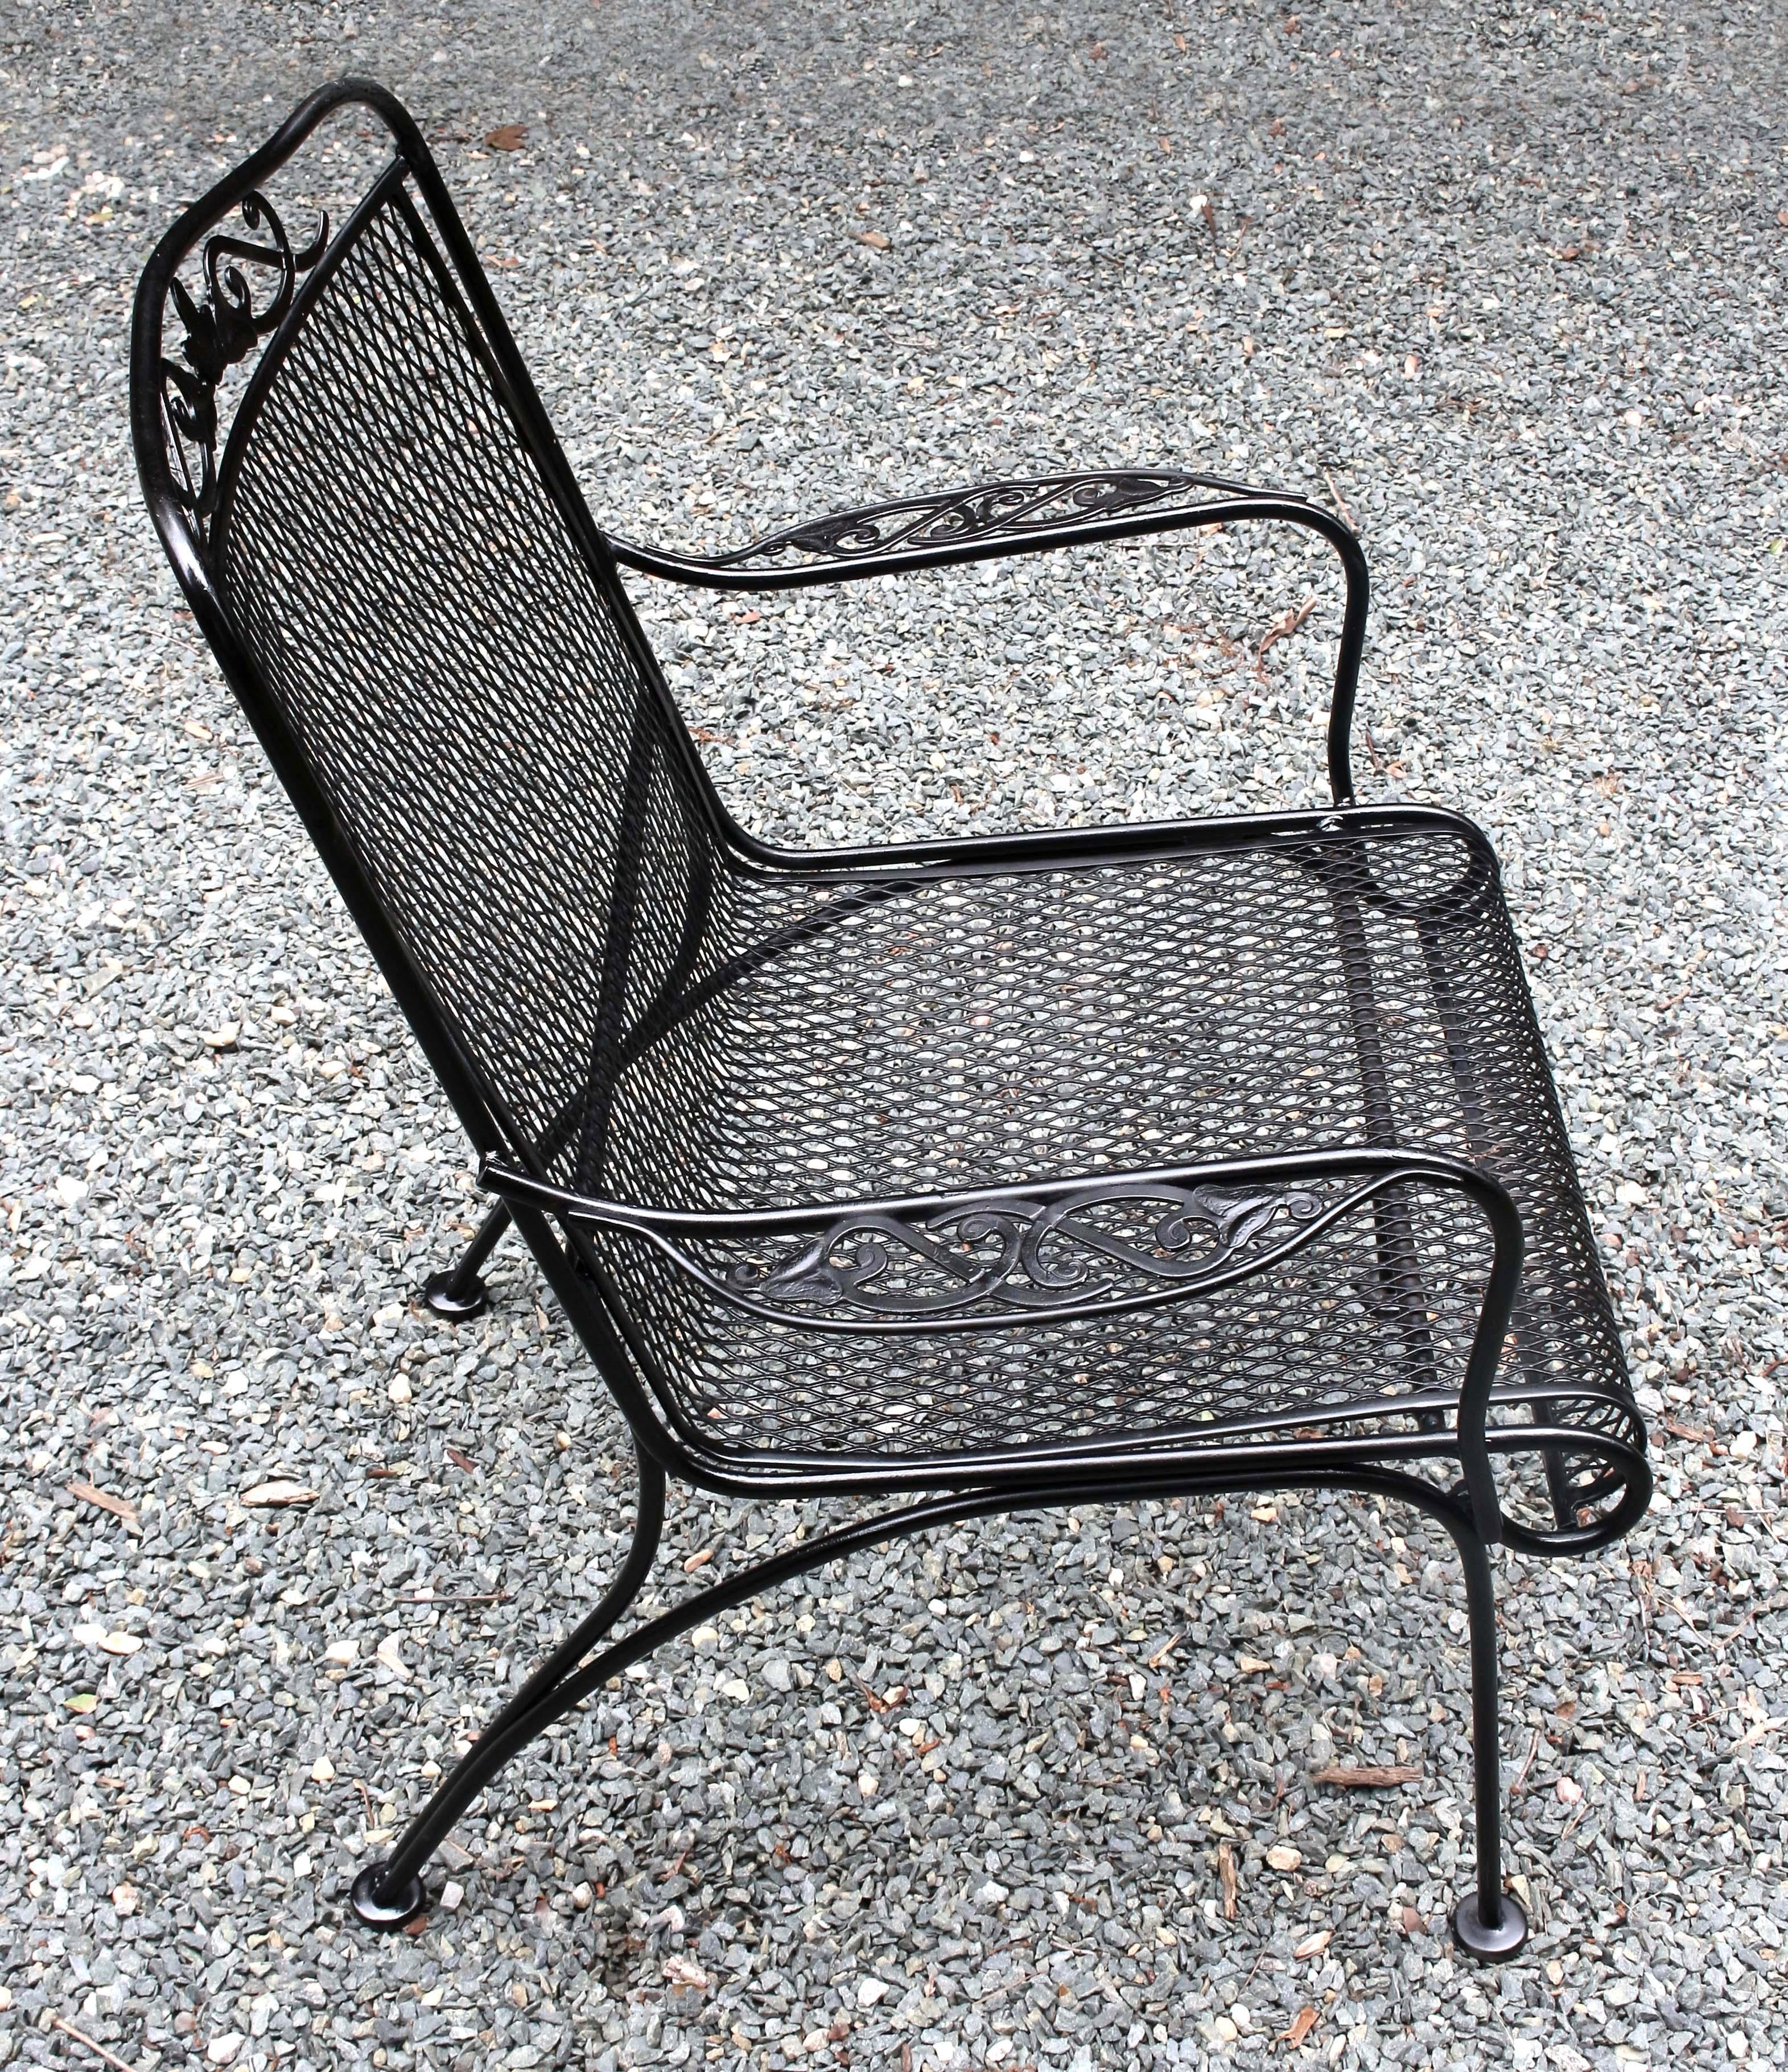 Wrought iron arm chair, c.1970s, probably by Russell Woodard. Leaf & scroll motif on crest & arms. Sturdy, arched, outswept back legs. Repainted.
26 5/8